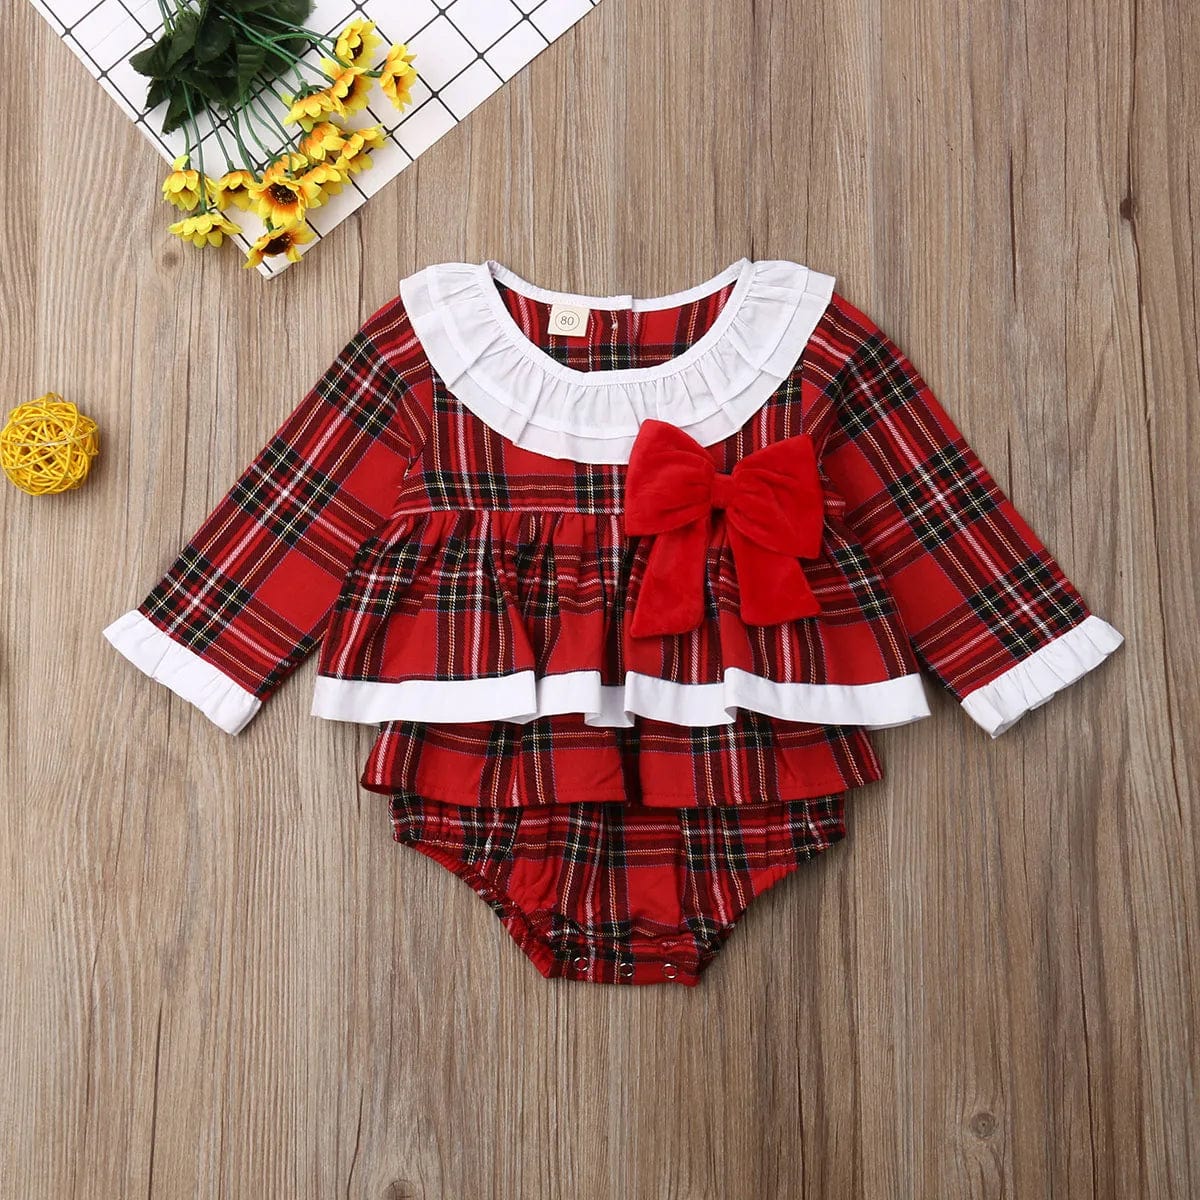 Xmas Newborn Toddler Baby Girl Clothes Lace Romper Dress Jumpsuit Red Outfit Plaid Ruffles Long Sleeve Outfit